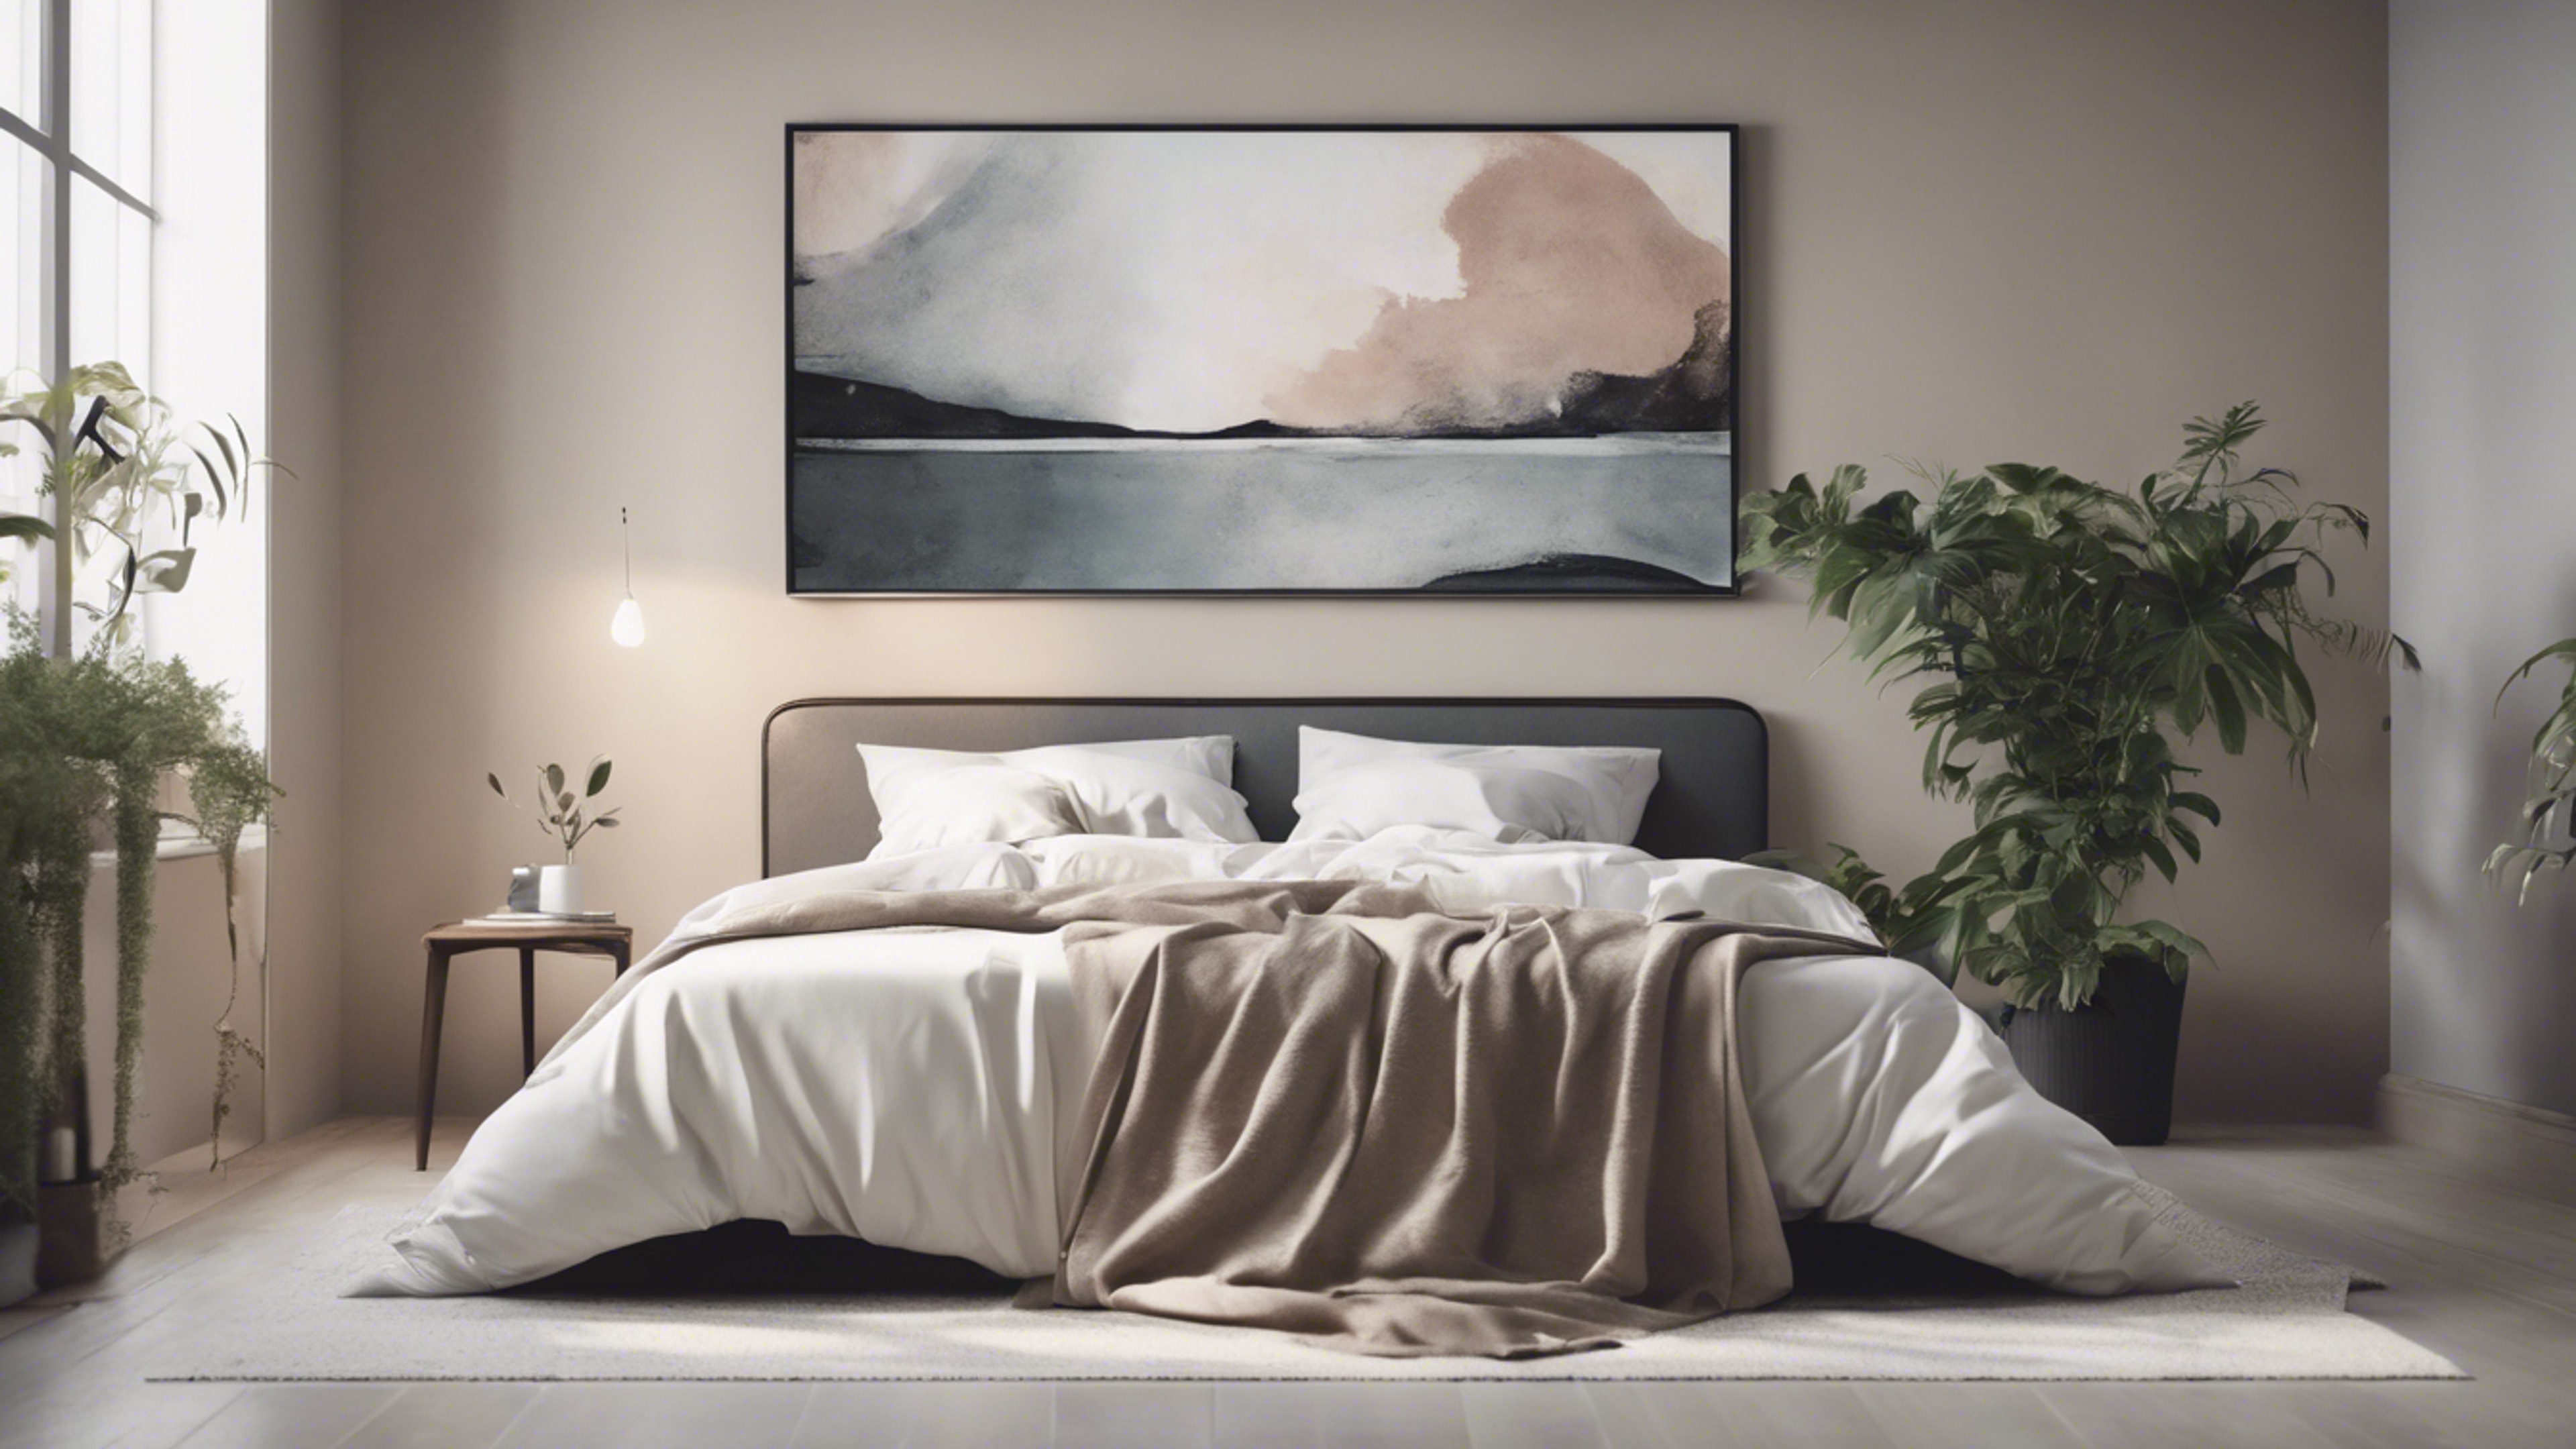 Minimalist bedroom in muted tones with a simple queen-sized bed, a potted plant, and an abstract painting. ផ្ទាំង​រូបភាព[015f6f42387b4ed28c5e]